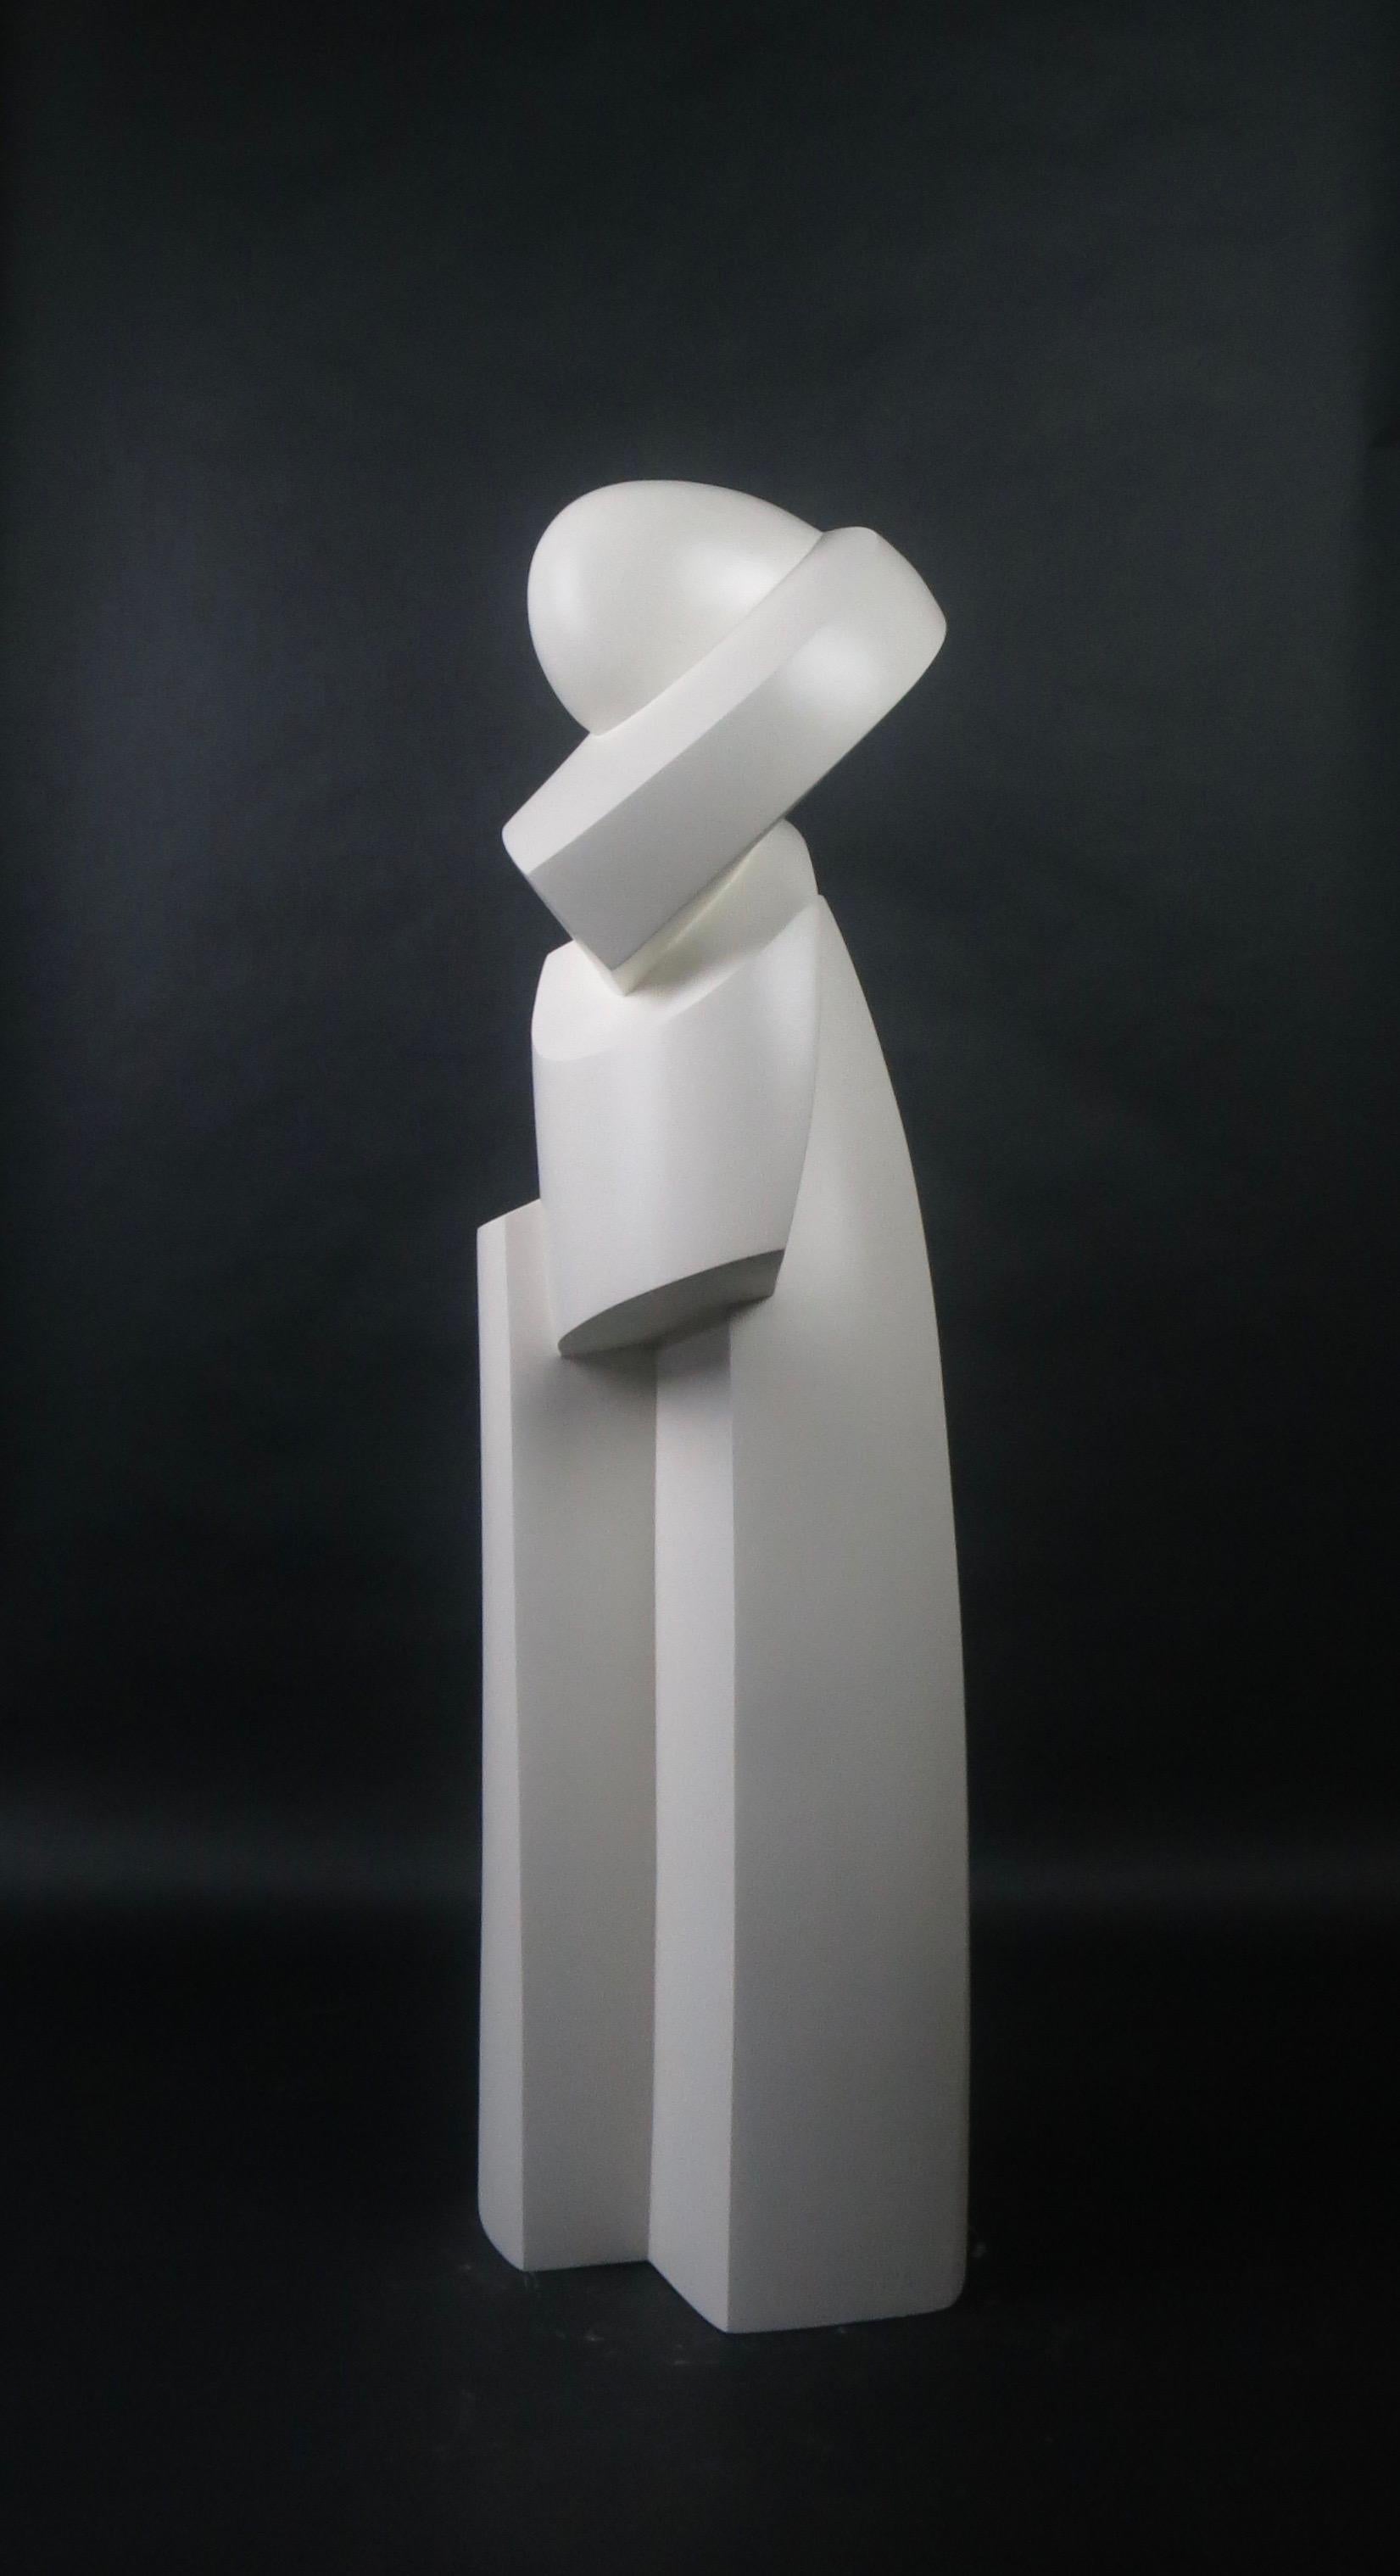 Basswood, white lacquer

As an artist I strive to create elegant sculptures that capture the true essence of the subject matter. Form, line and surface are used as the visual language. The figure is abstracted to a minimalist form, void of any